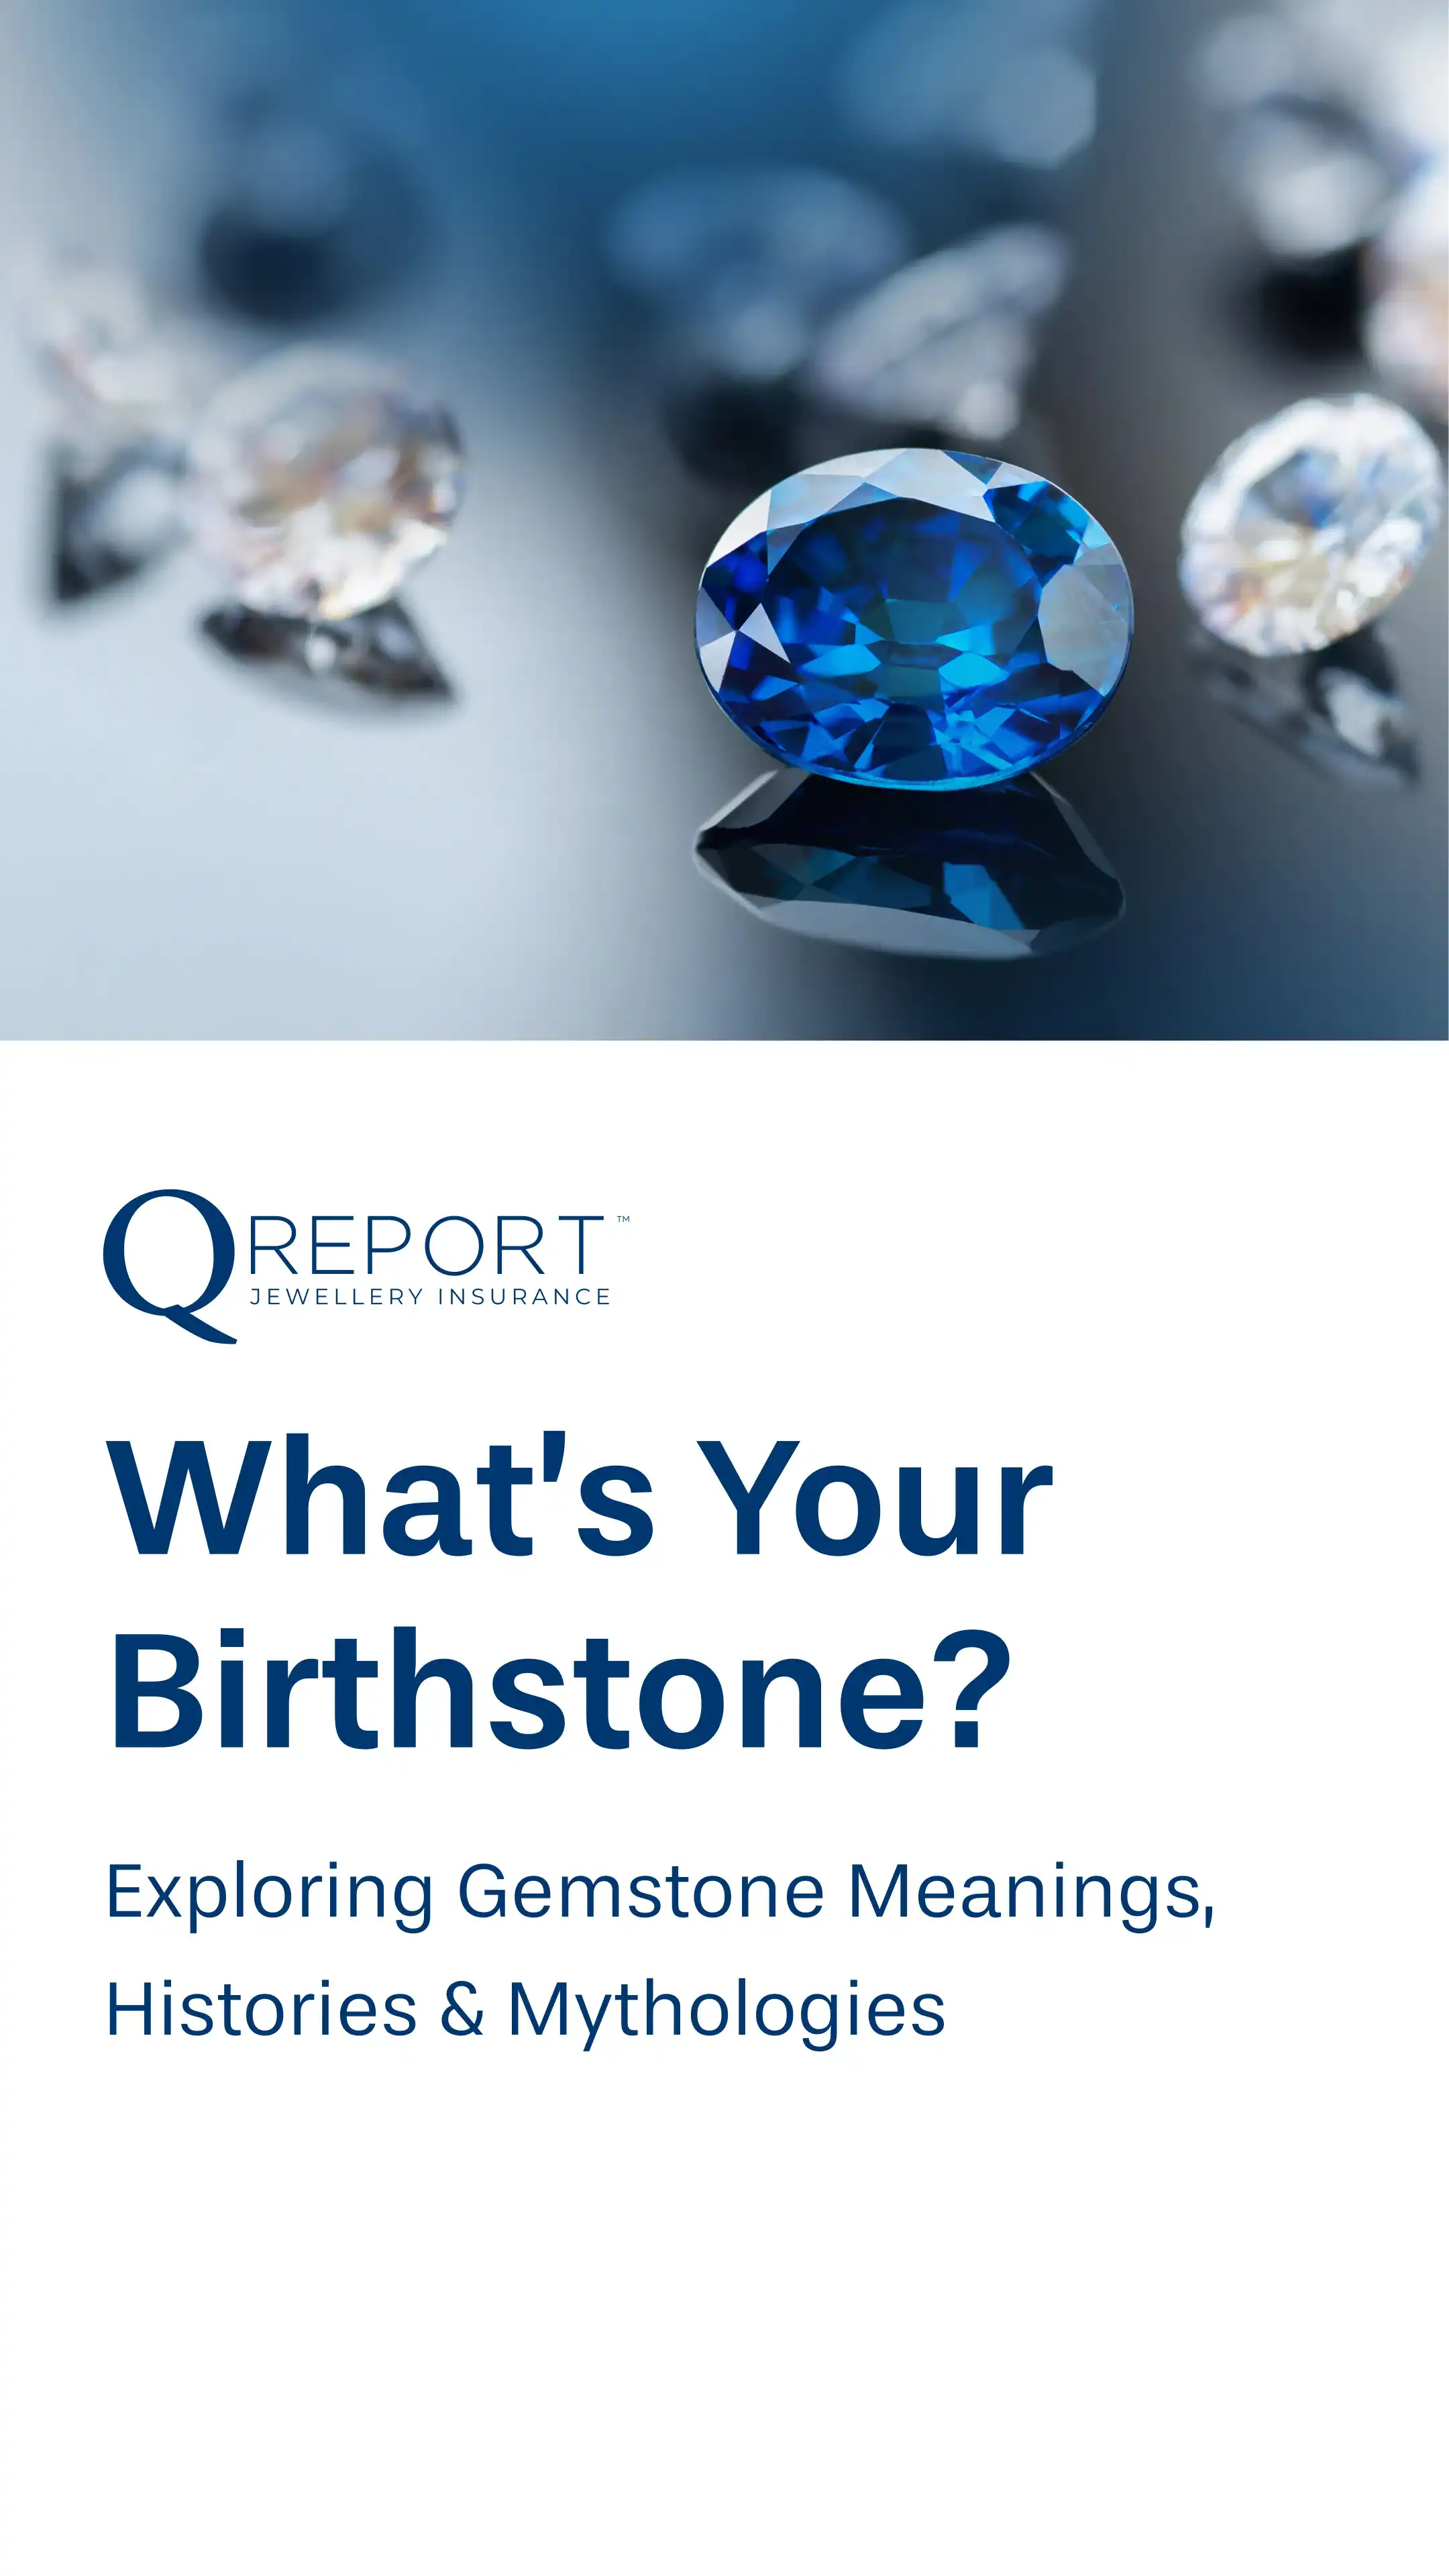 What’s Your Birthstone? Exploring Gemstone Meanings, Histories & Mythologies